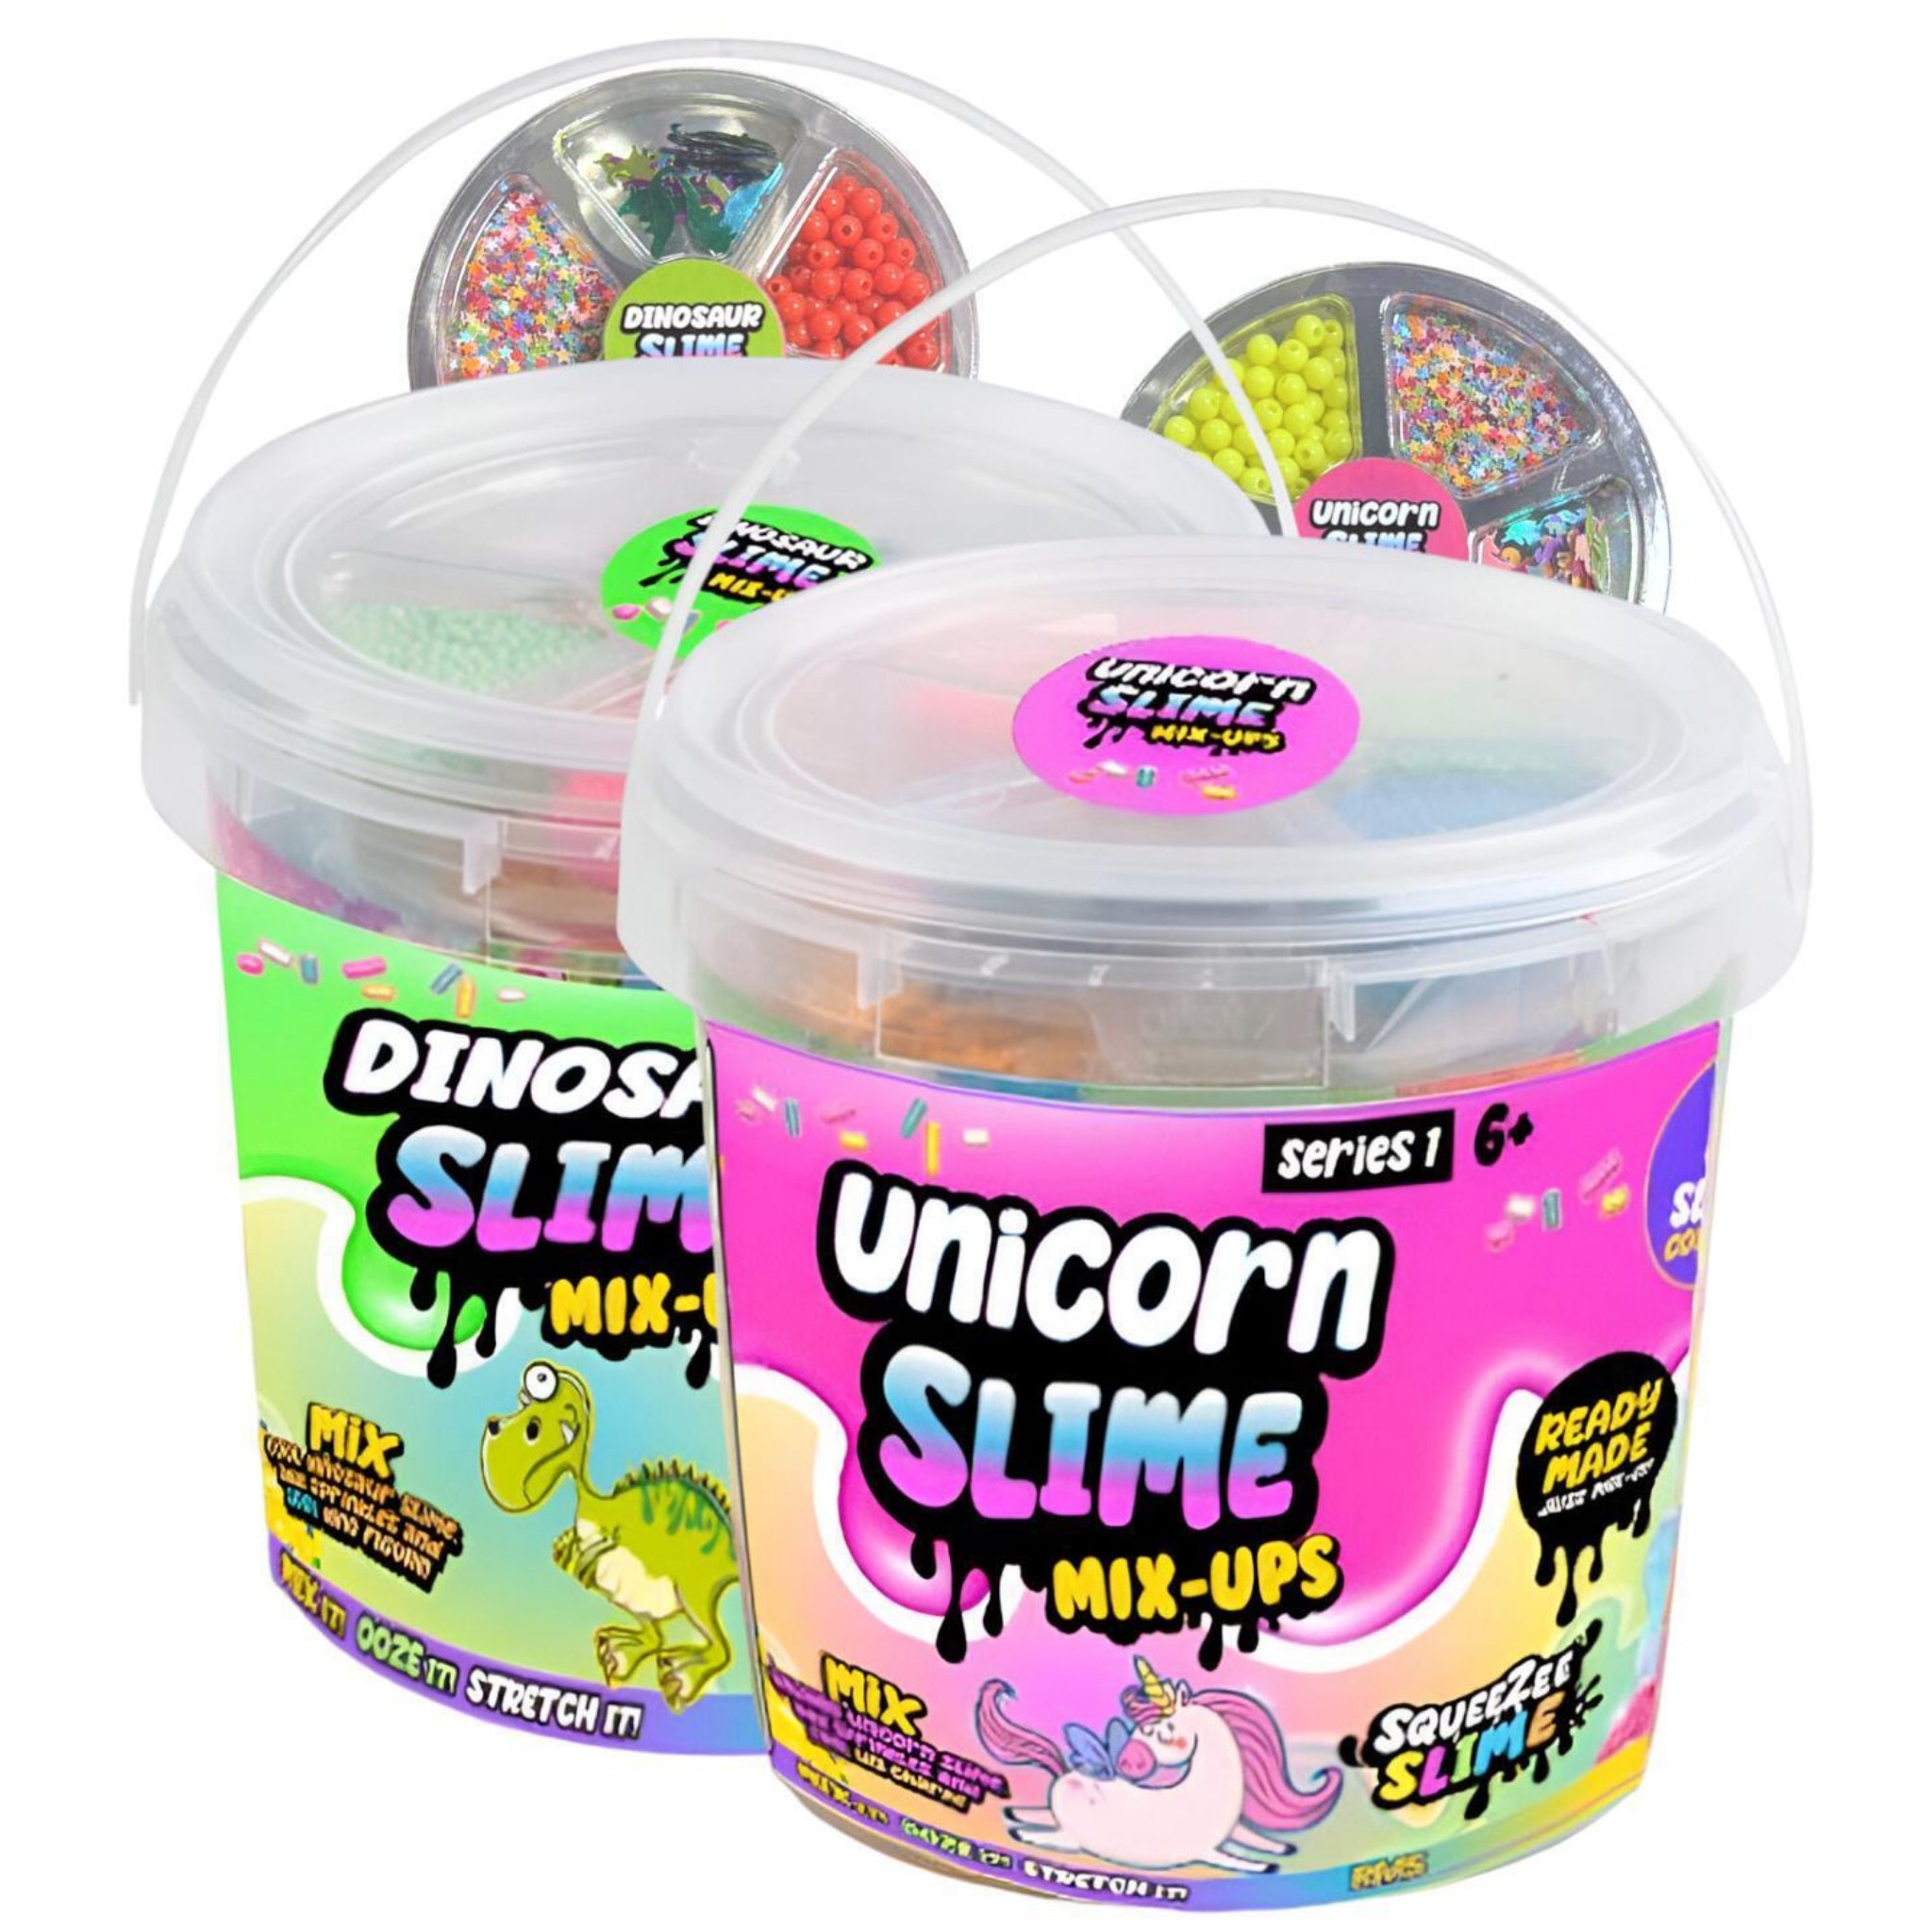 Beclen Harp Unicorn / Dinosaur Squeezee Slime Mix-Ups Tub Toy Party Art Crafting Kits 500g